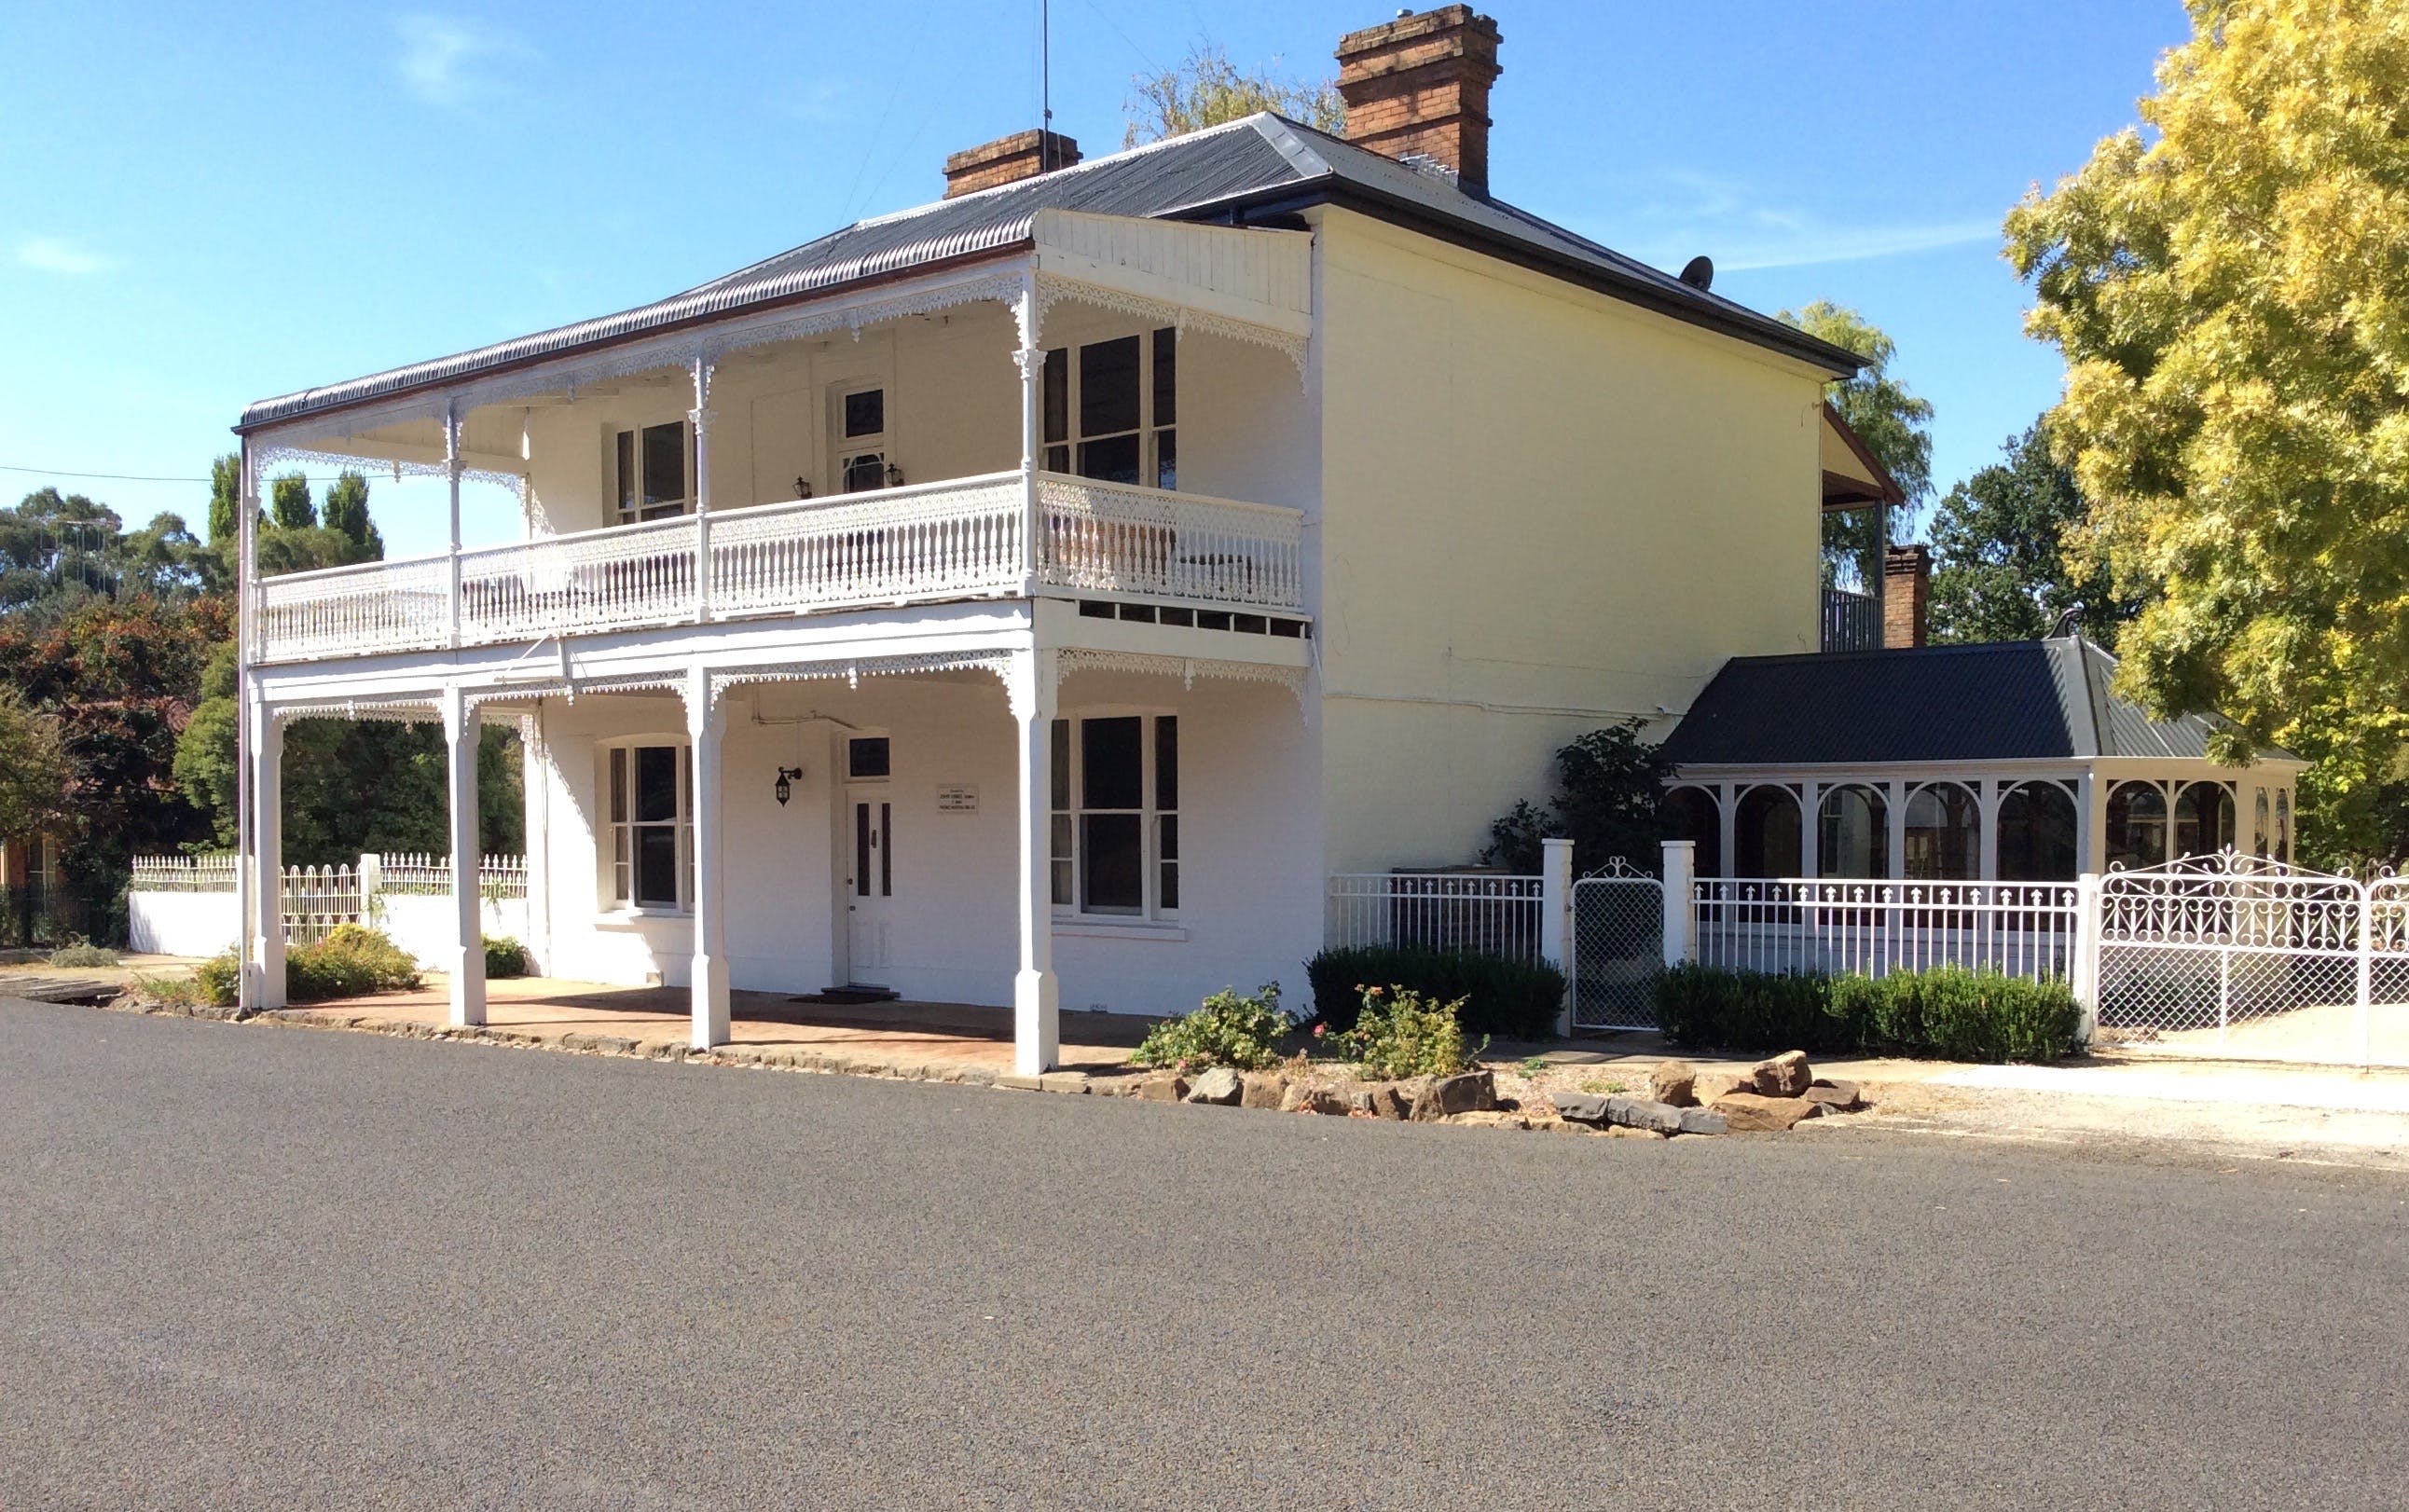 The White House Carcoar - Accommodation in Brisbane